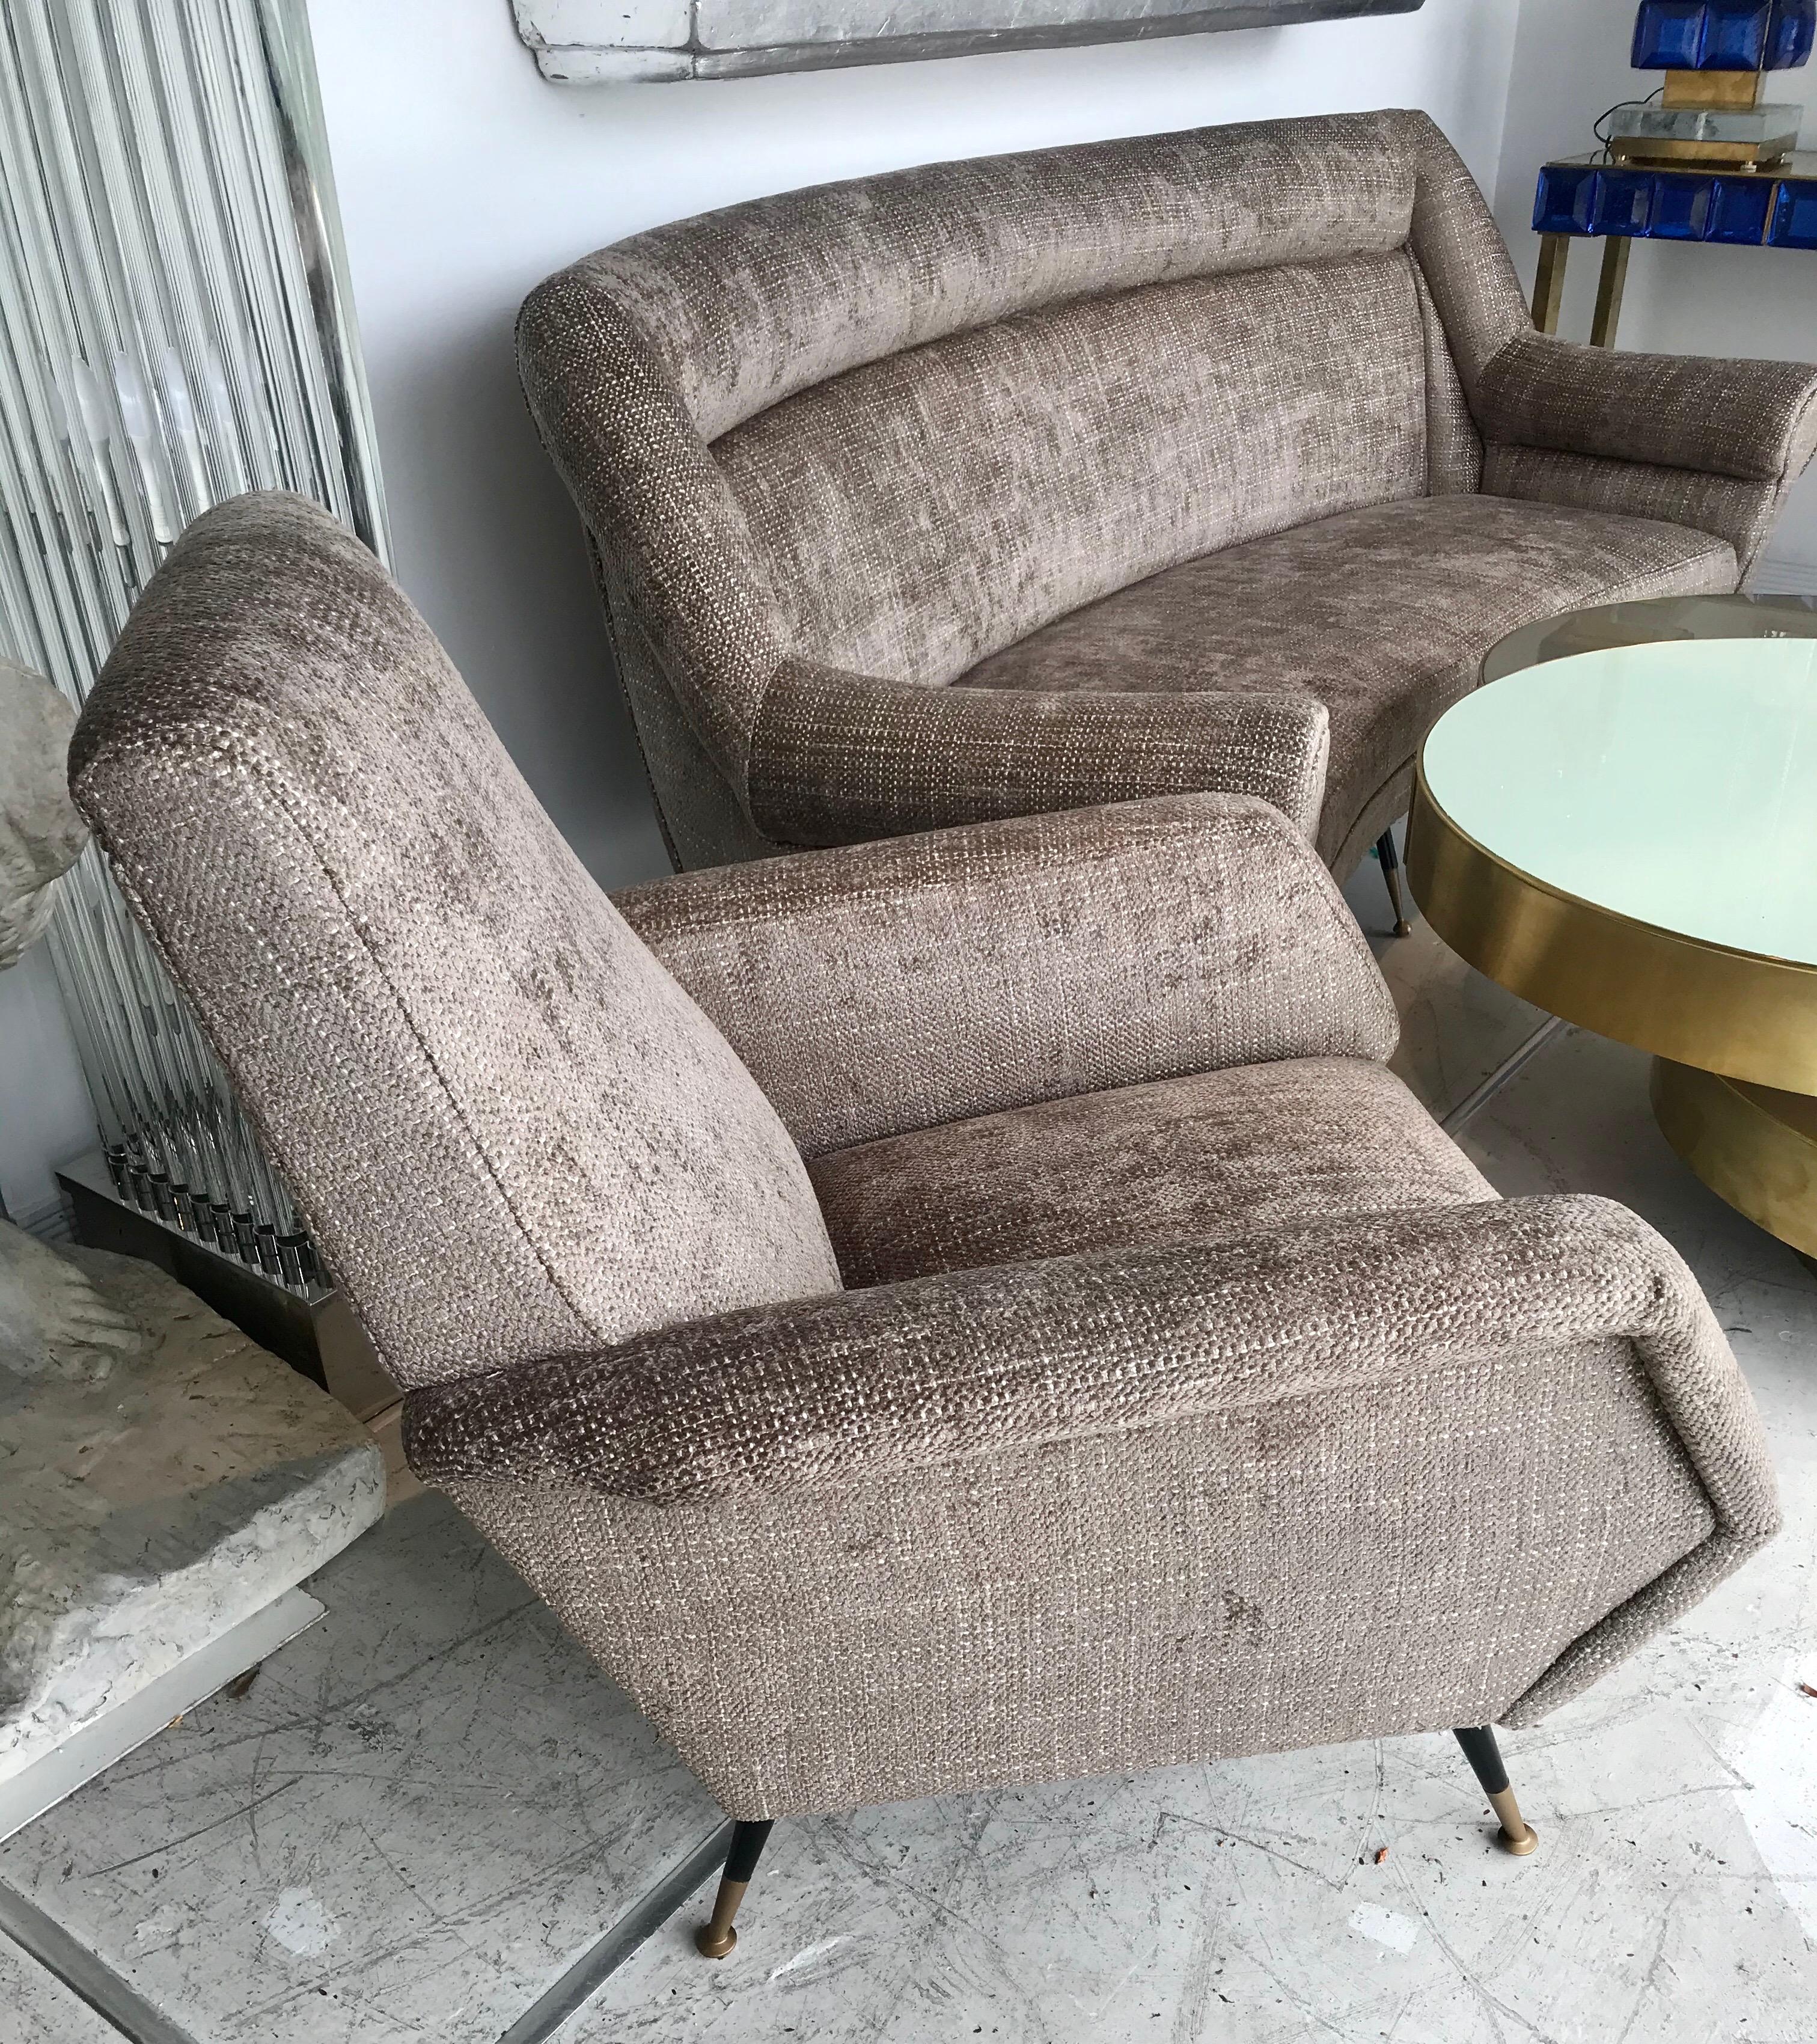 A pair of elegant Italian chaise lounge chairs in the style of Gio Ponti with beautiful taupe tweed upholstery and chic tapered legs.